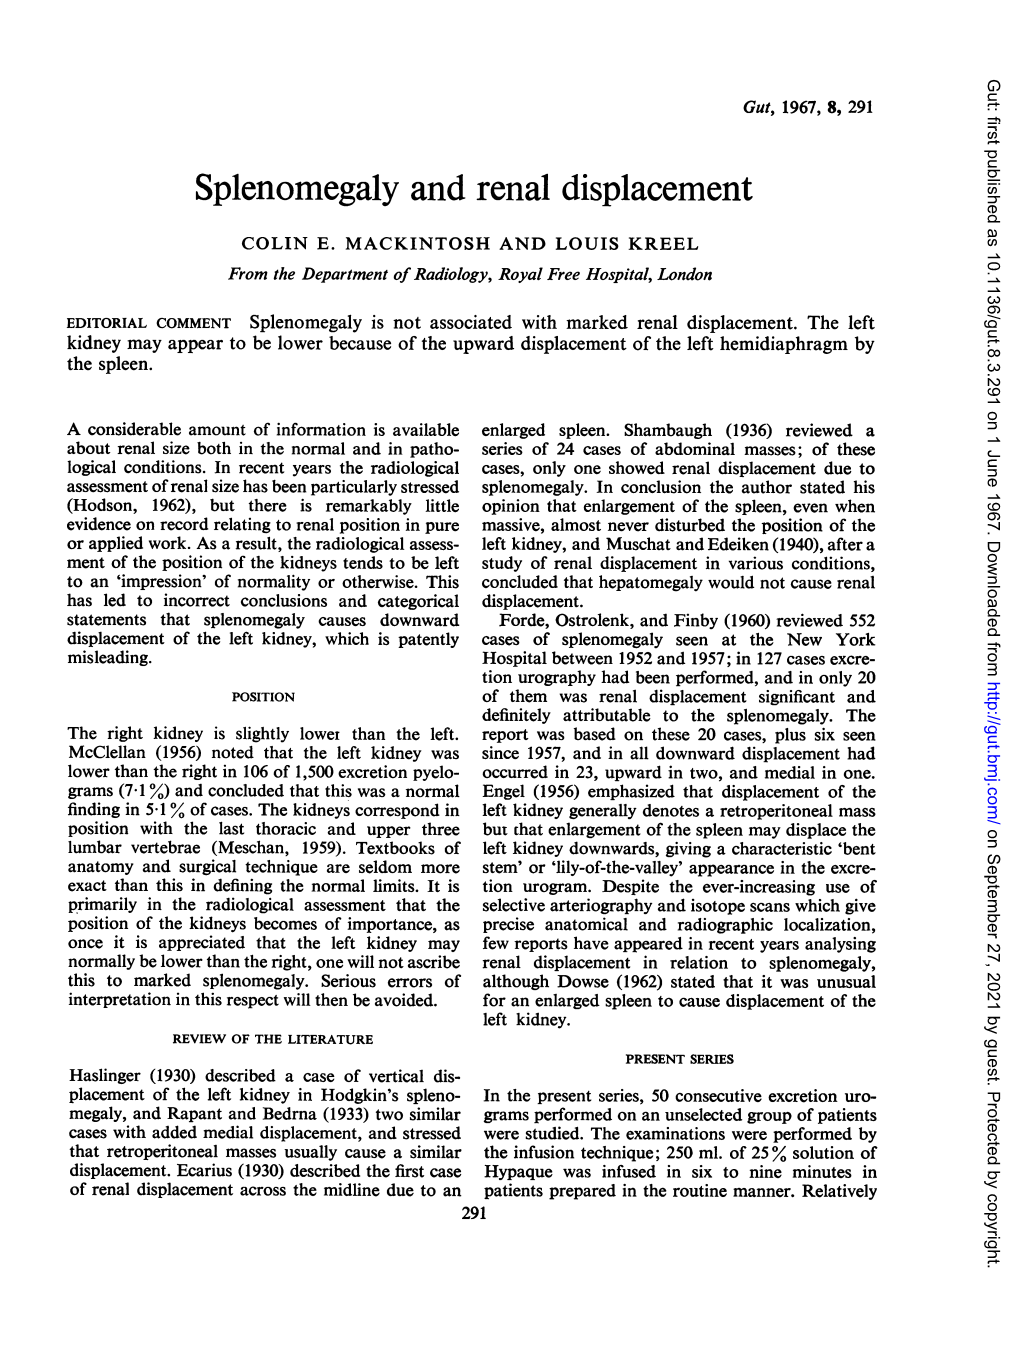 Splenomegaly and Renal Displacement